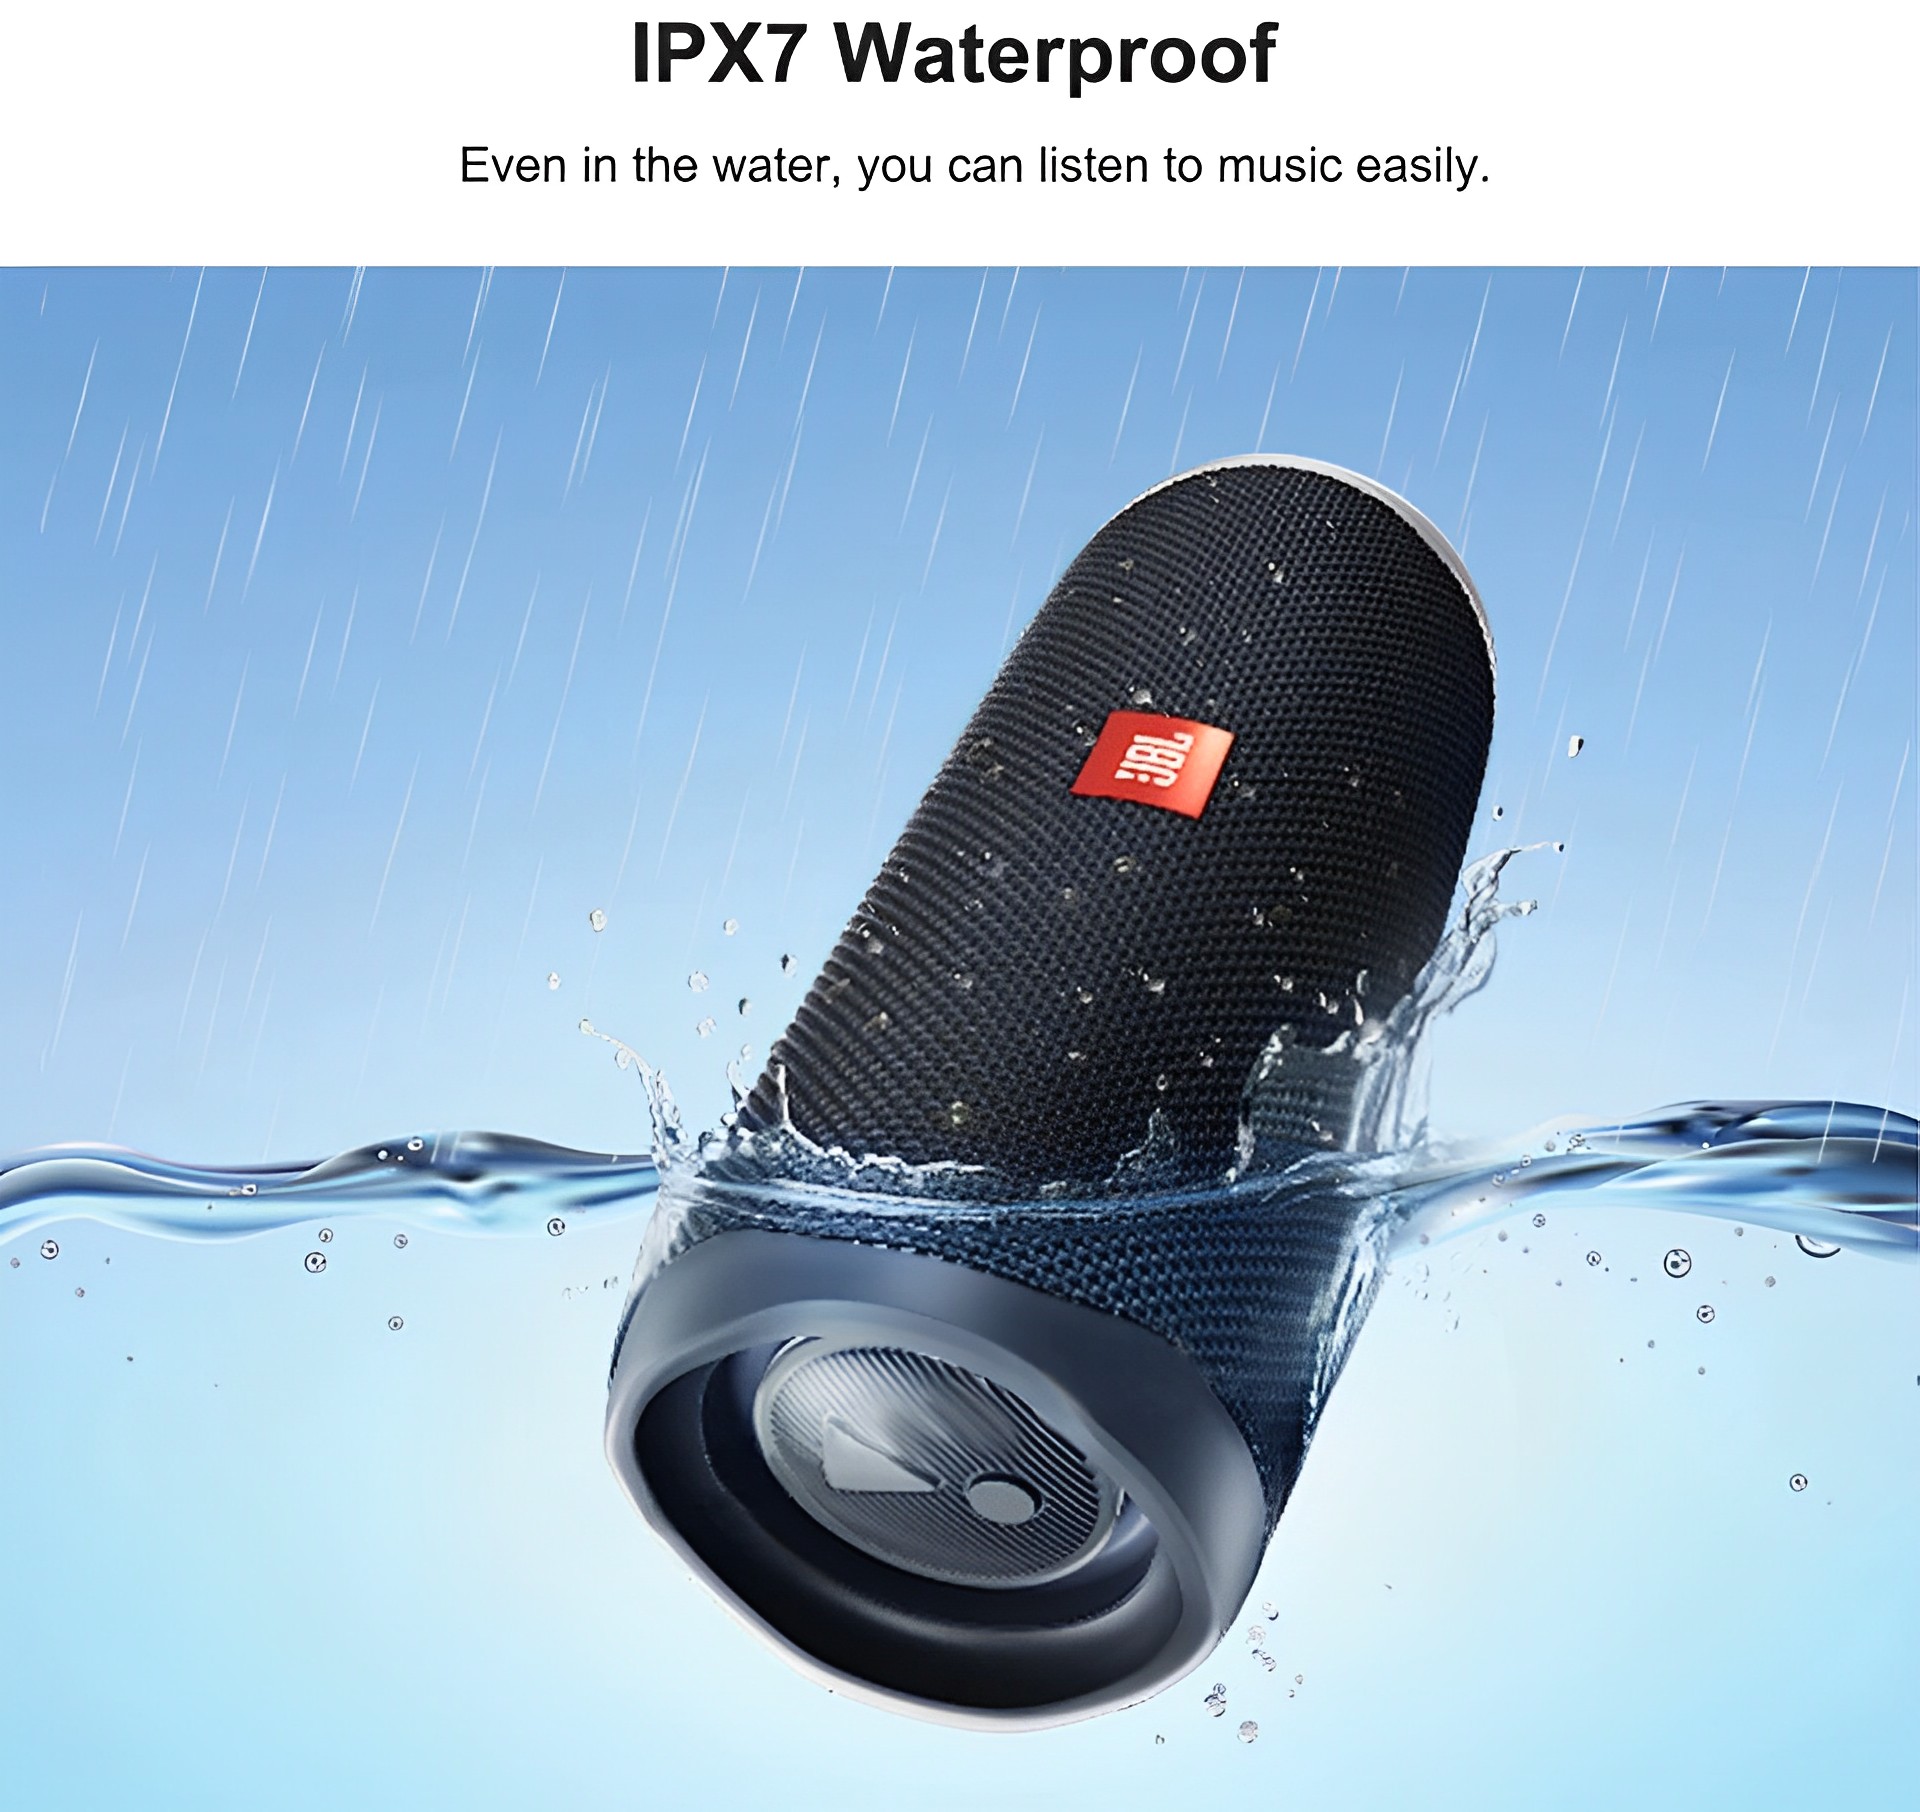 Buy a JBL FLIP 5 Portable Waterproof Speakers from Gadget Garage BD in Bangladesh for an affordable price. 